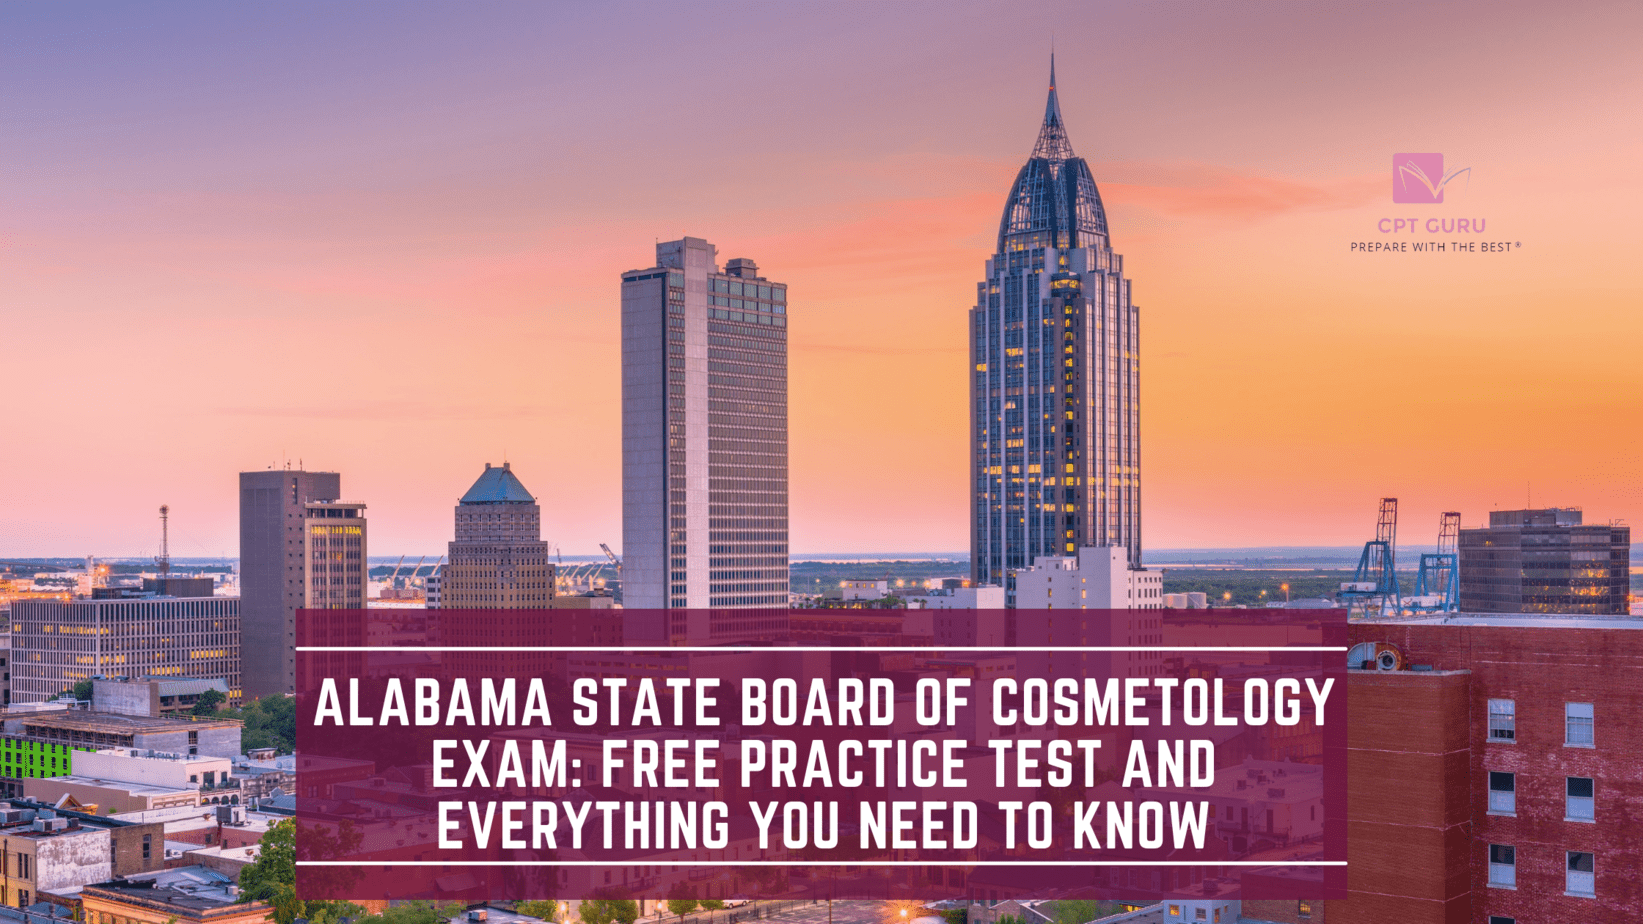 Alabama State Board of Cosmetology Exam: Free Practice Test and Everything You Need to Know